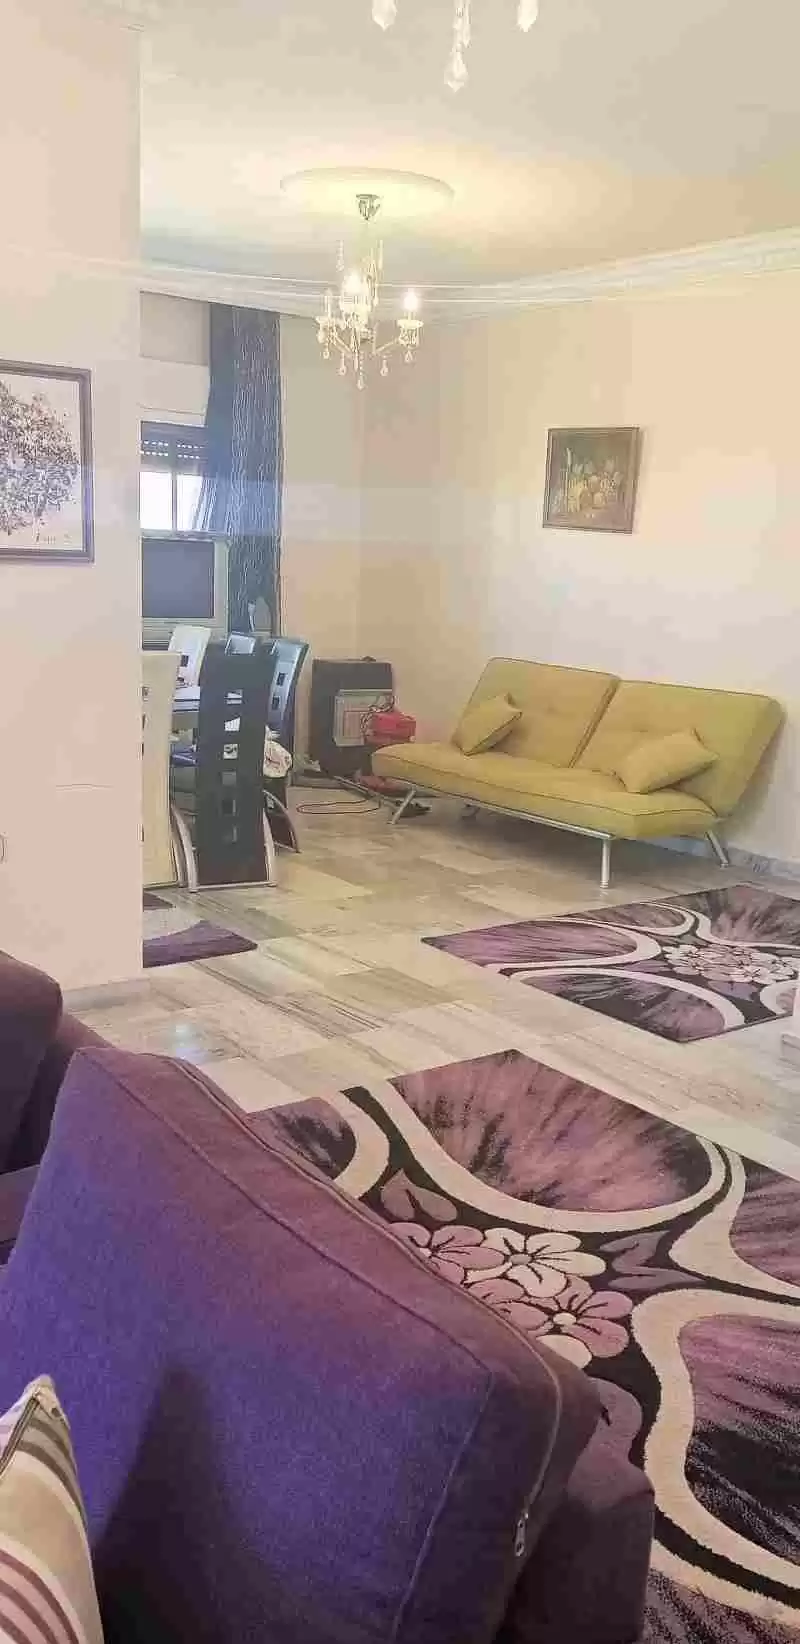 Residential Ready Property 3 Bedrooms F/F Apartment  for rent in Amman #28056 - 1  image 